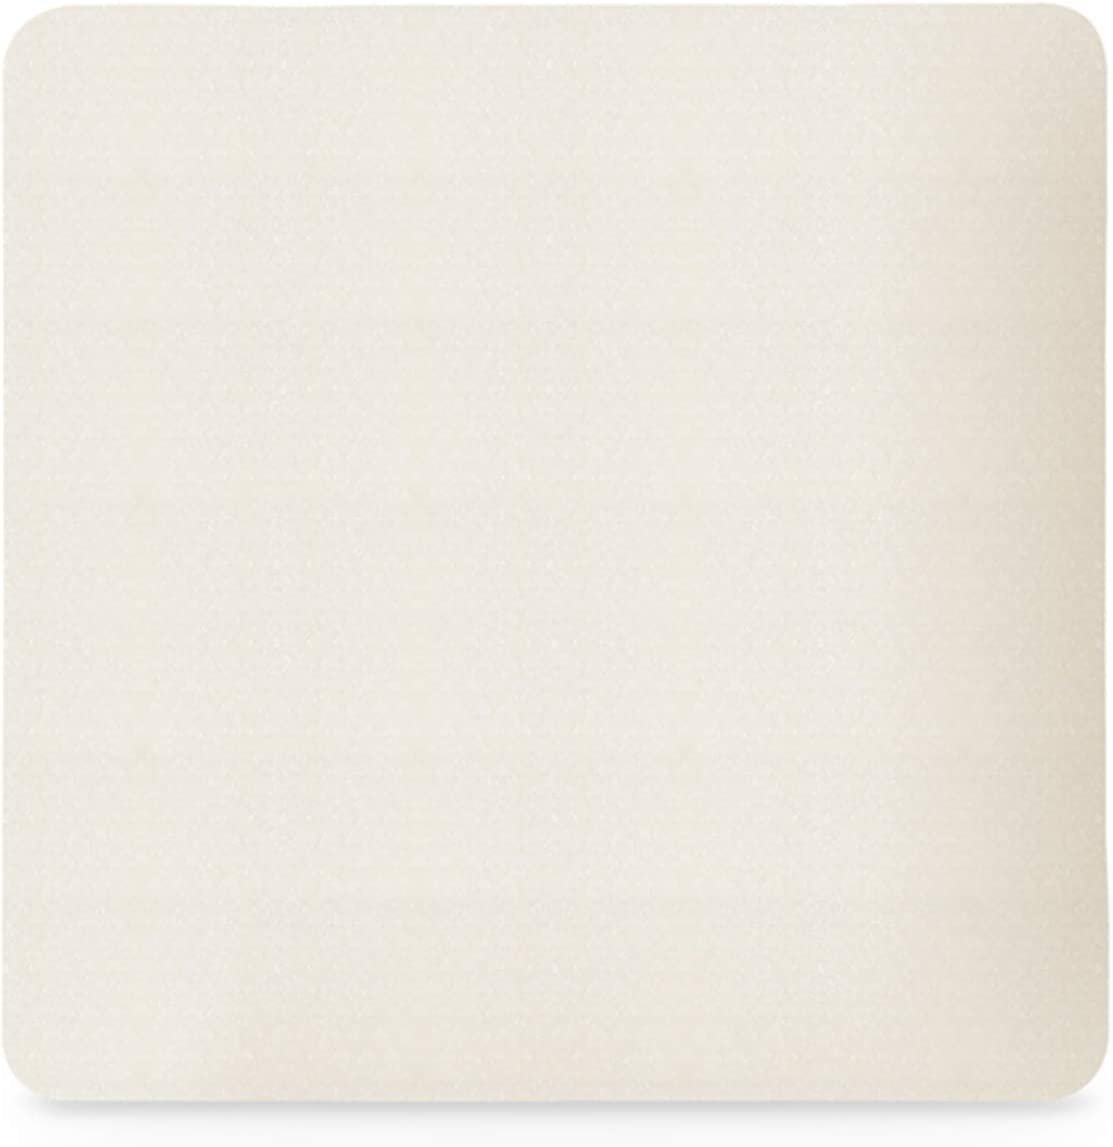 MedVance Foam Non-Bordered Non-Adhesive Wound Dressing, 6"X6", Box of 5